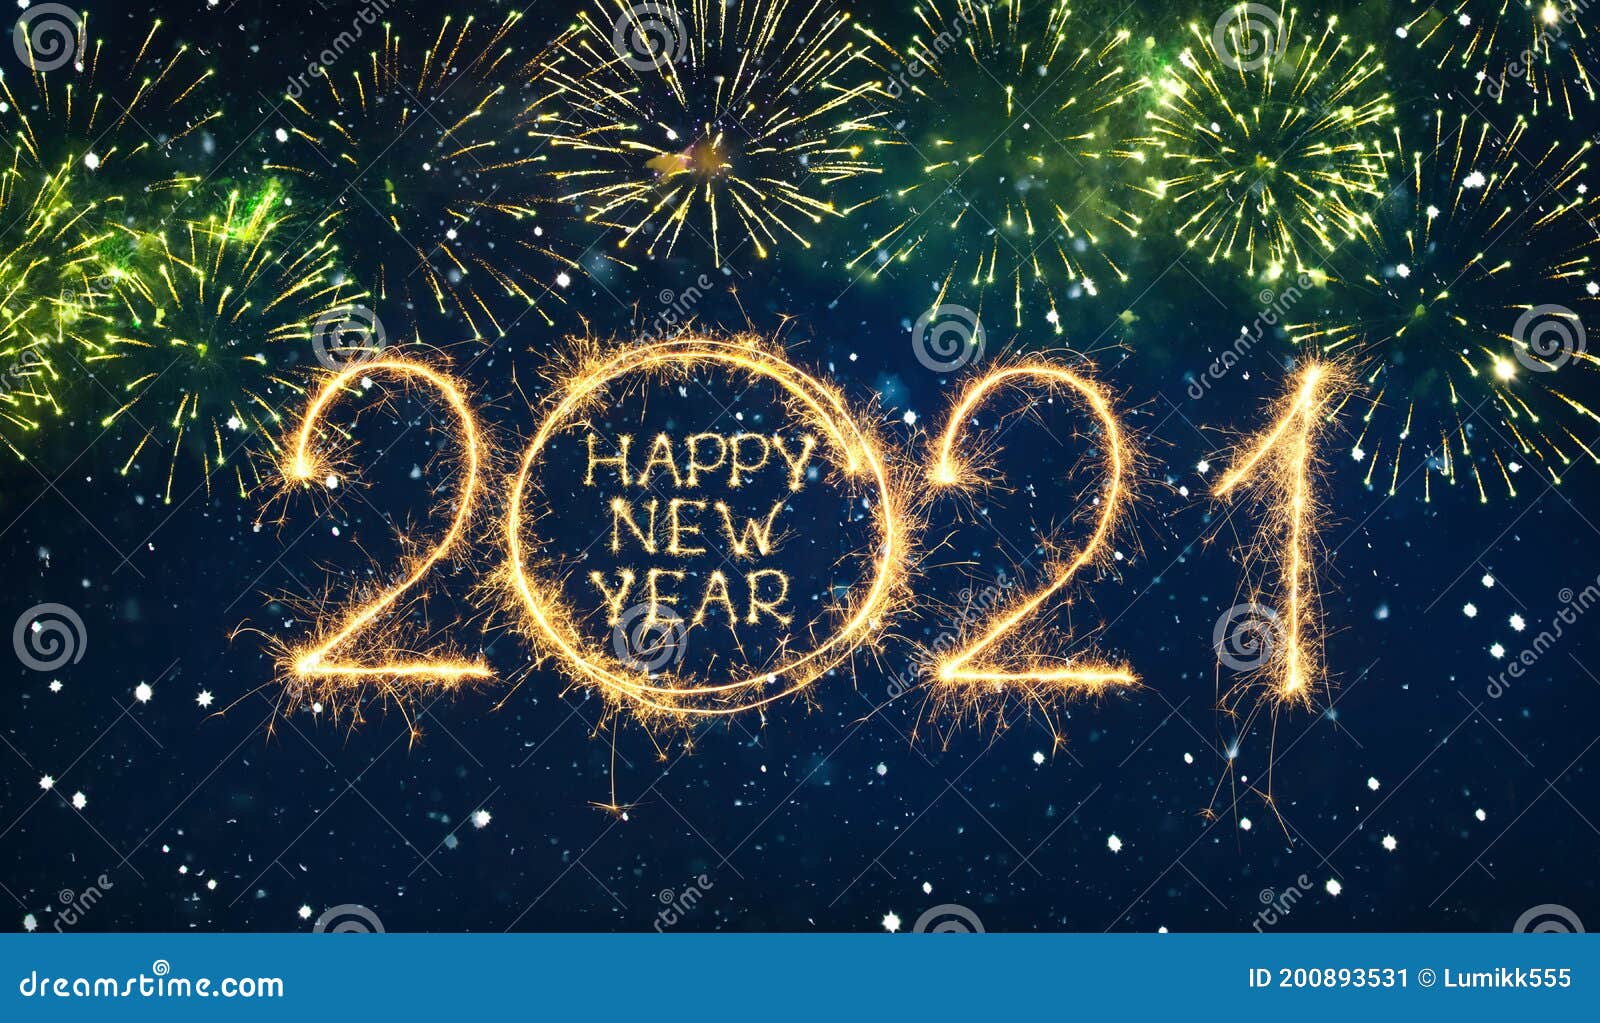 27 551 Happy New Year 21 Photos Free Royalty Free Stock Photos From Dreamstime